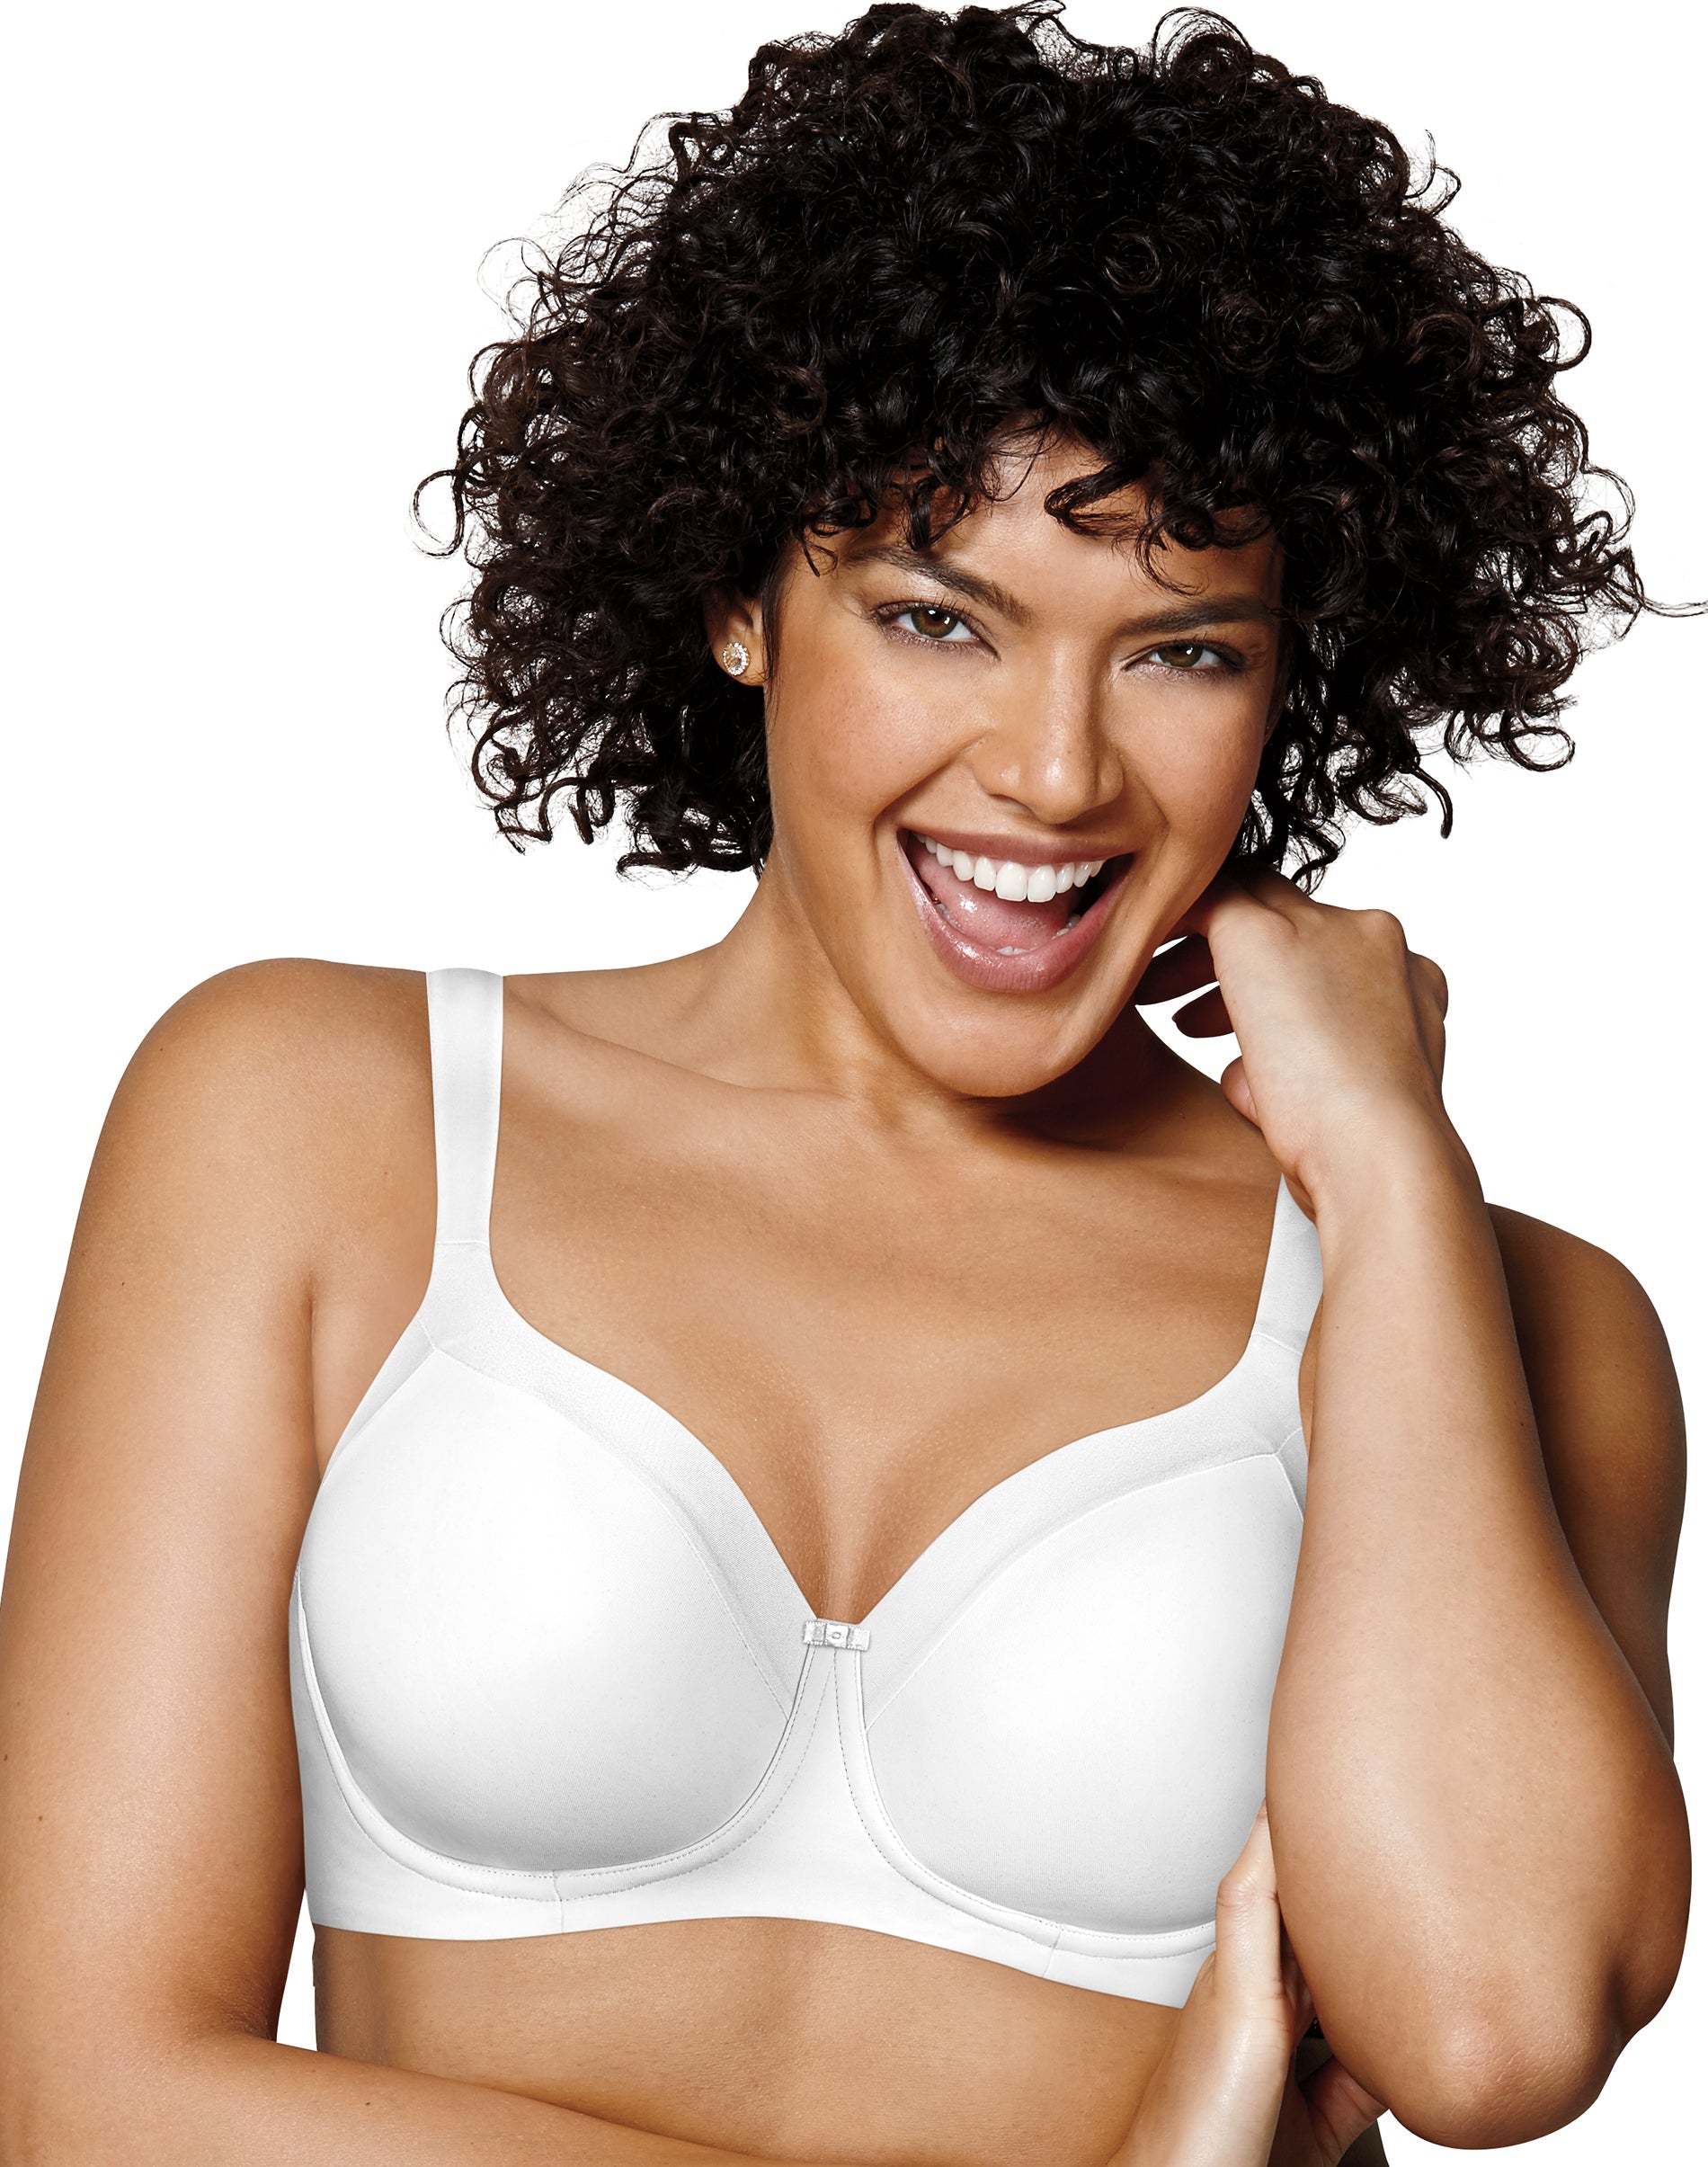 Tillies - Online Factory Shop - Brand New Playtex Non-Wire and Wired Bras!  Get yours today!! Parys Address: 100 Breë street, Parys, 9585 Online  Address: www.tillies.co.za FREE DELIVERY - Krugersdorp and surrounding